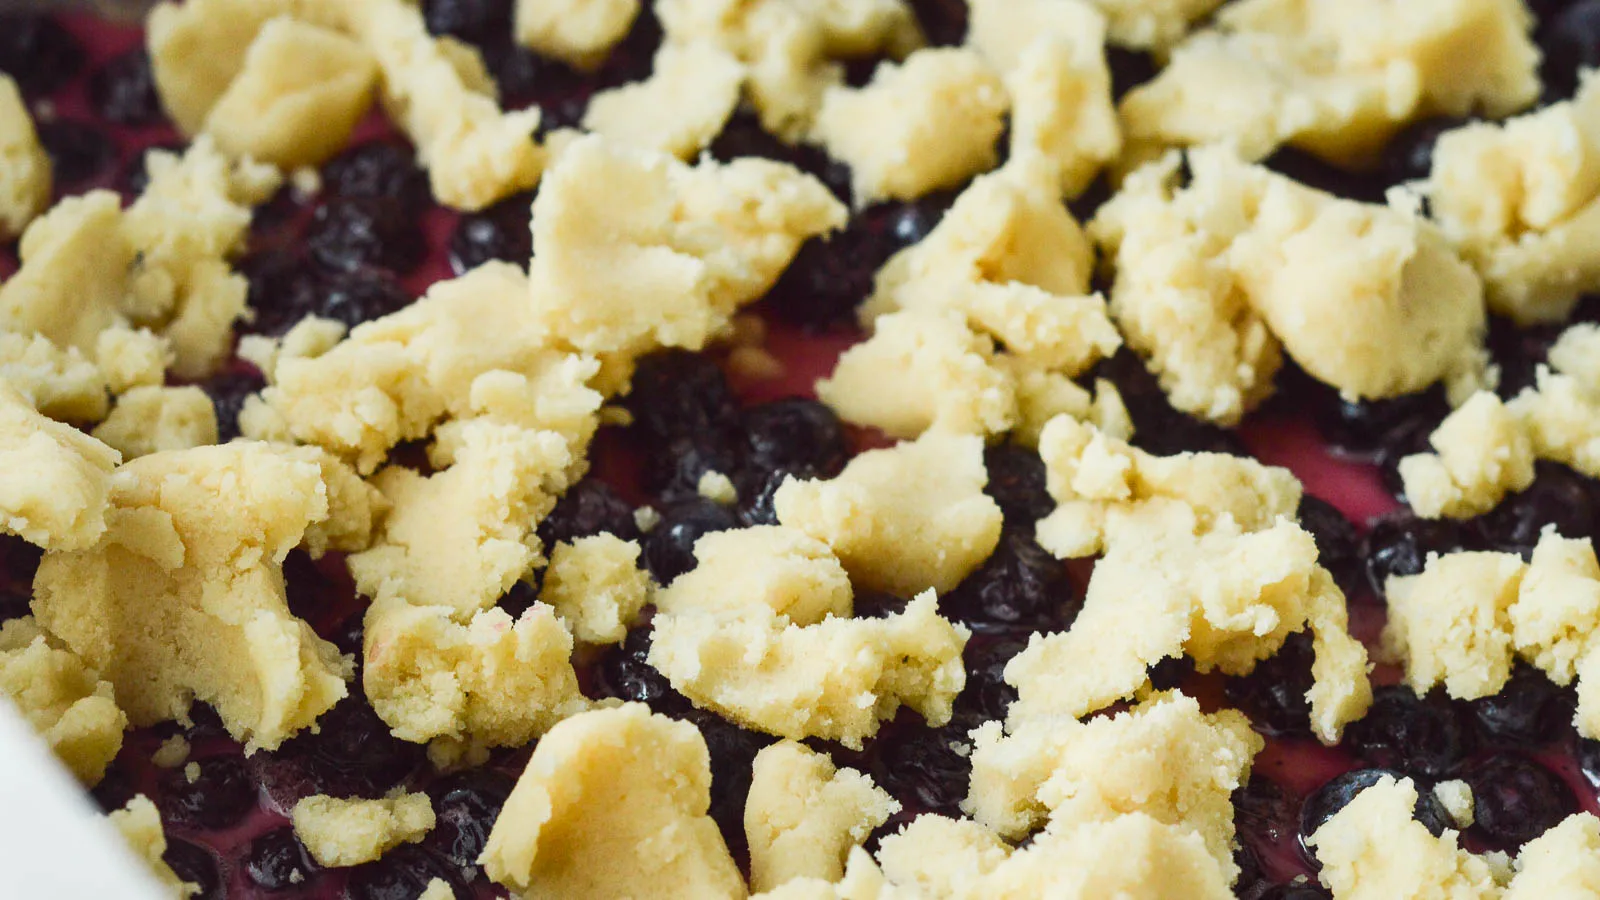 Crumbled shortbread topping dotted over the champagne blueberry filling for these easy blueberry crumble bars